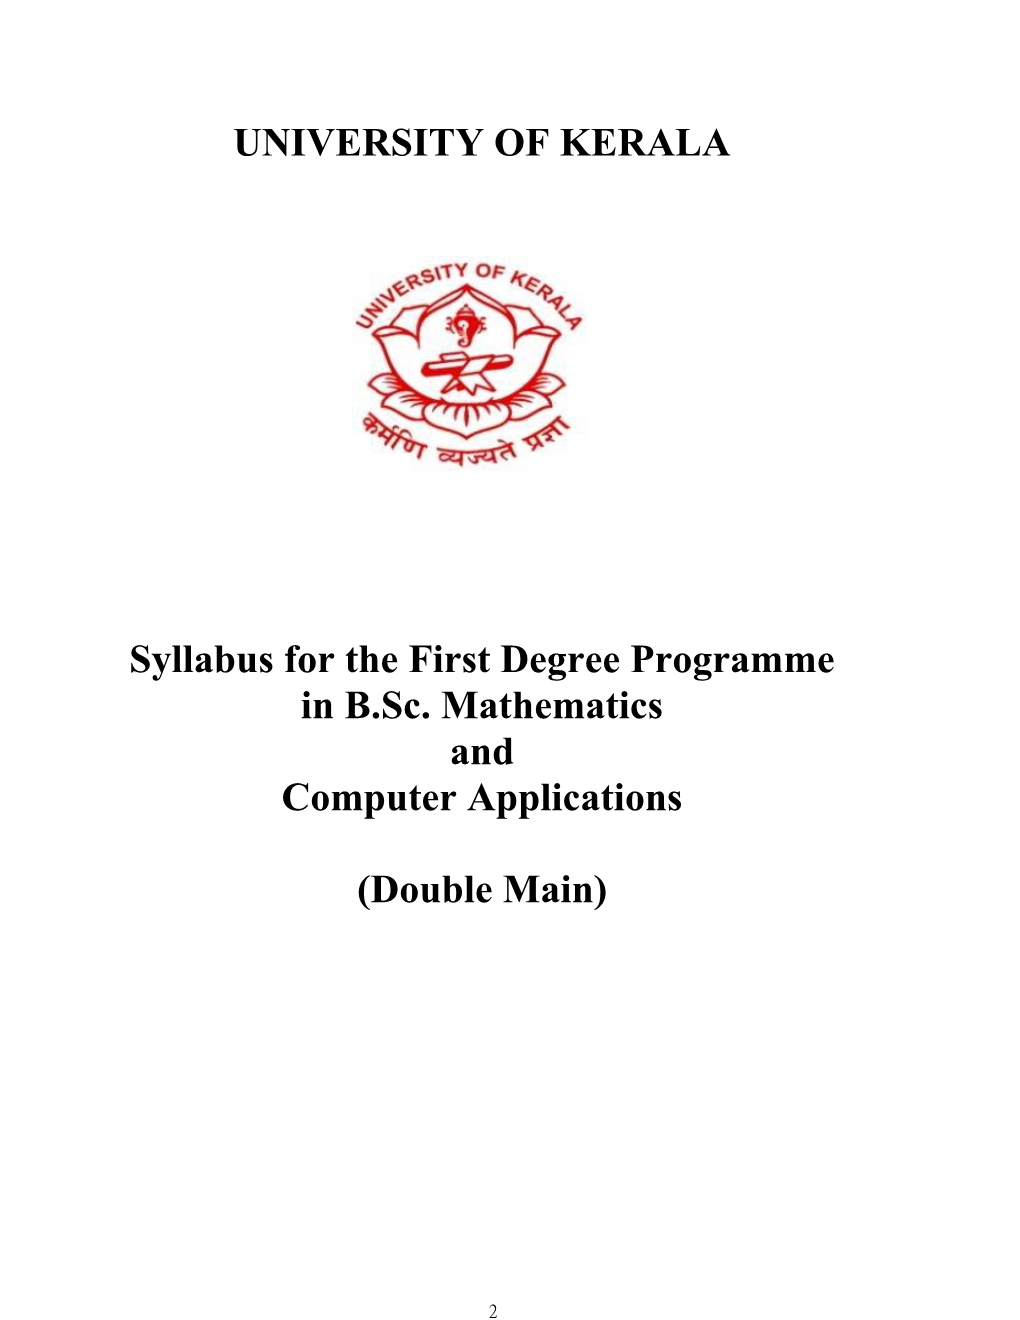 Syllabus for the First Degree Programme in B.Sc. Mathematics and Computer Applications